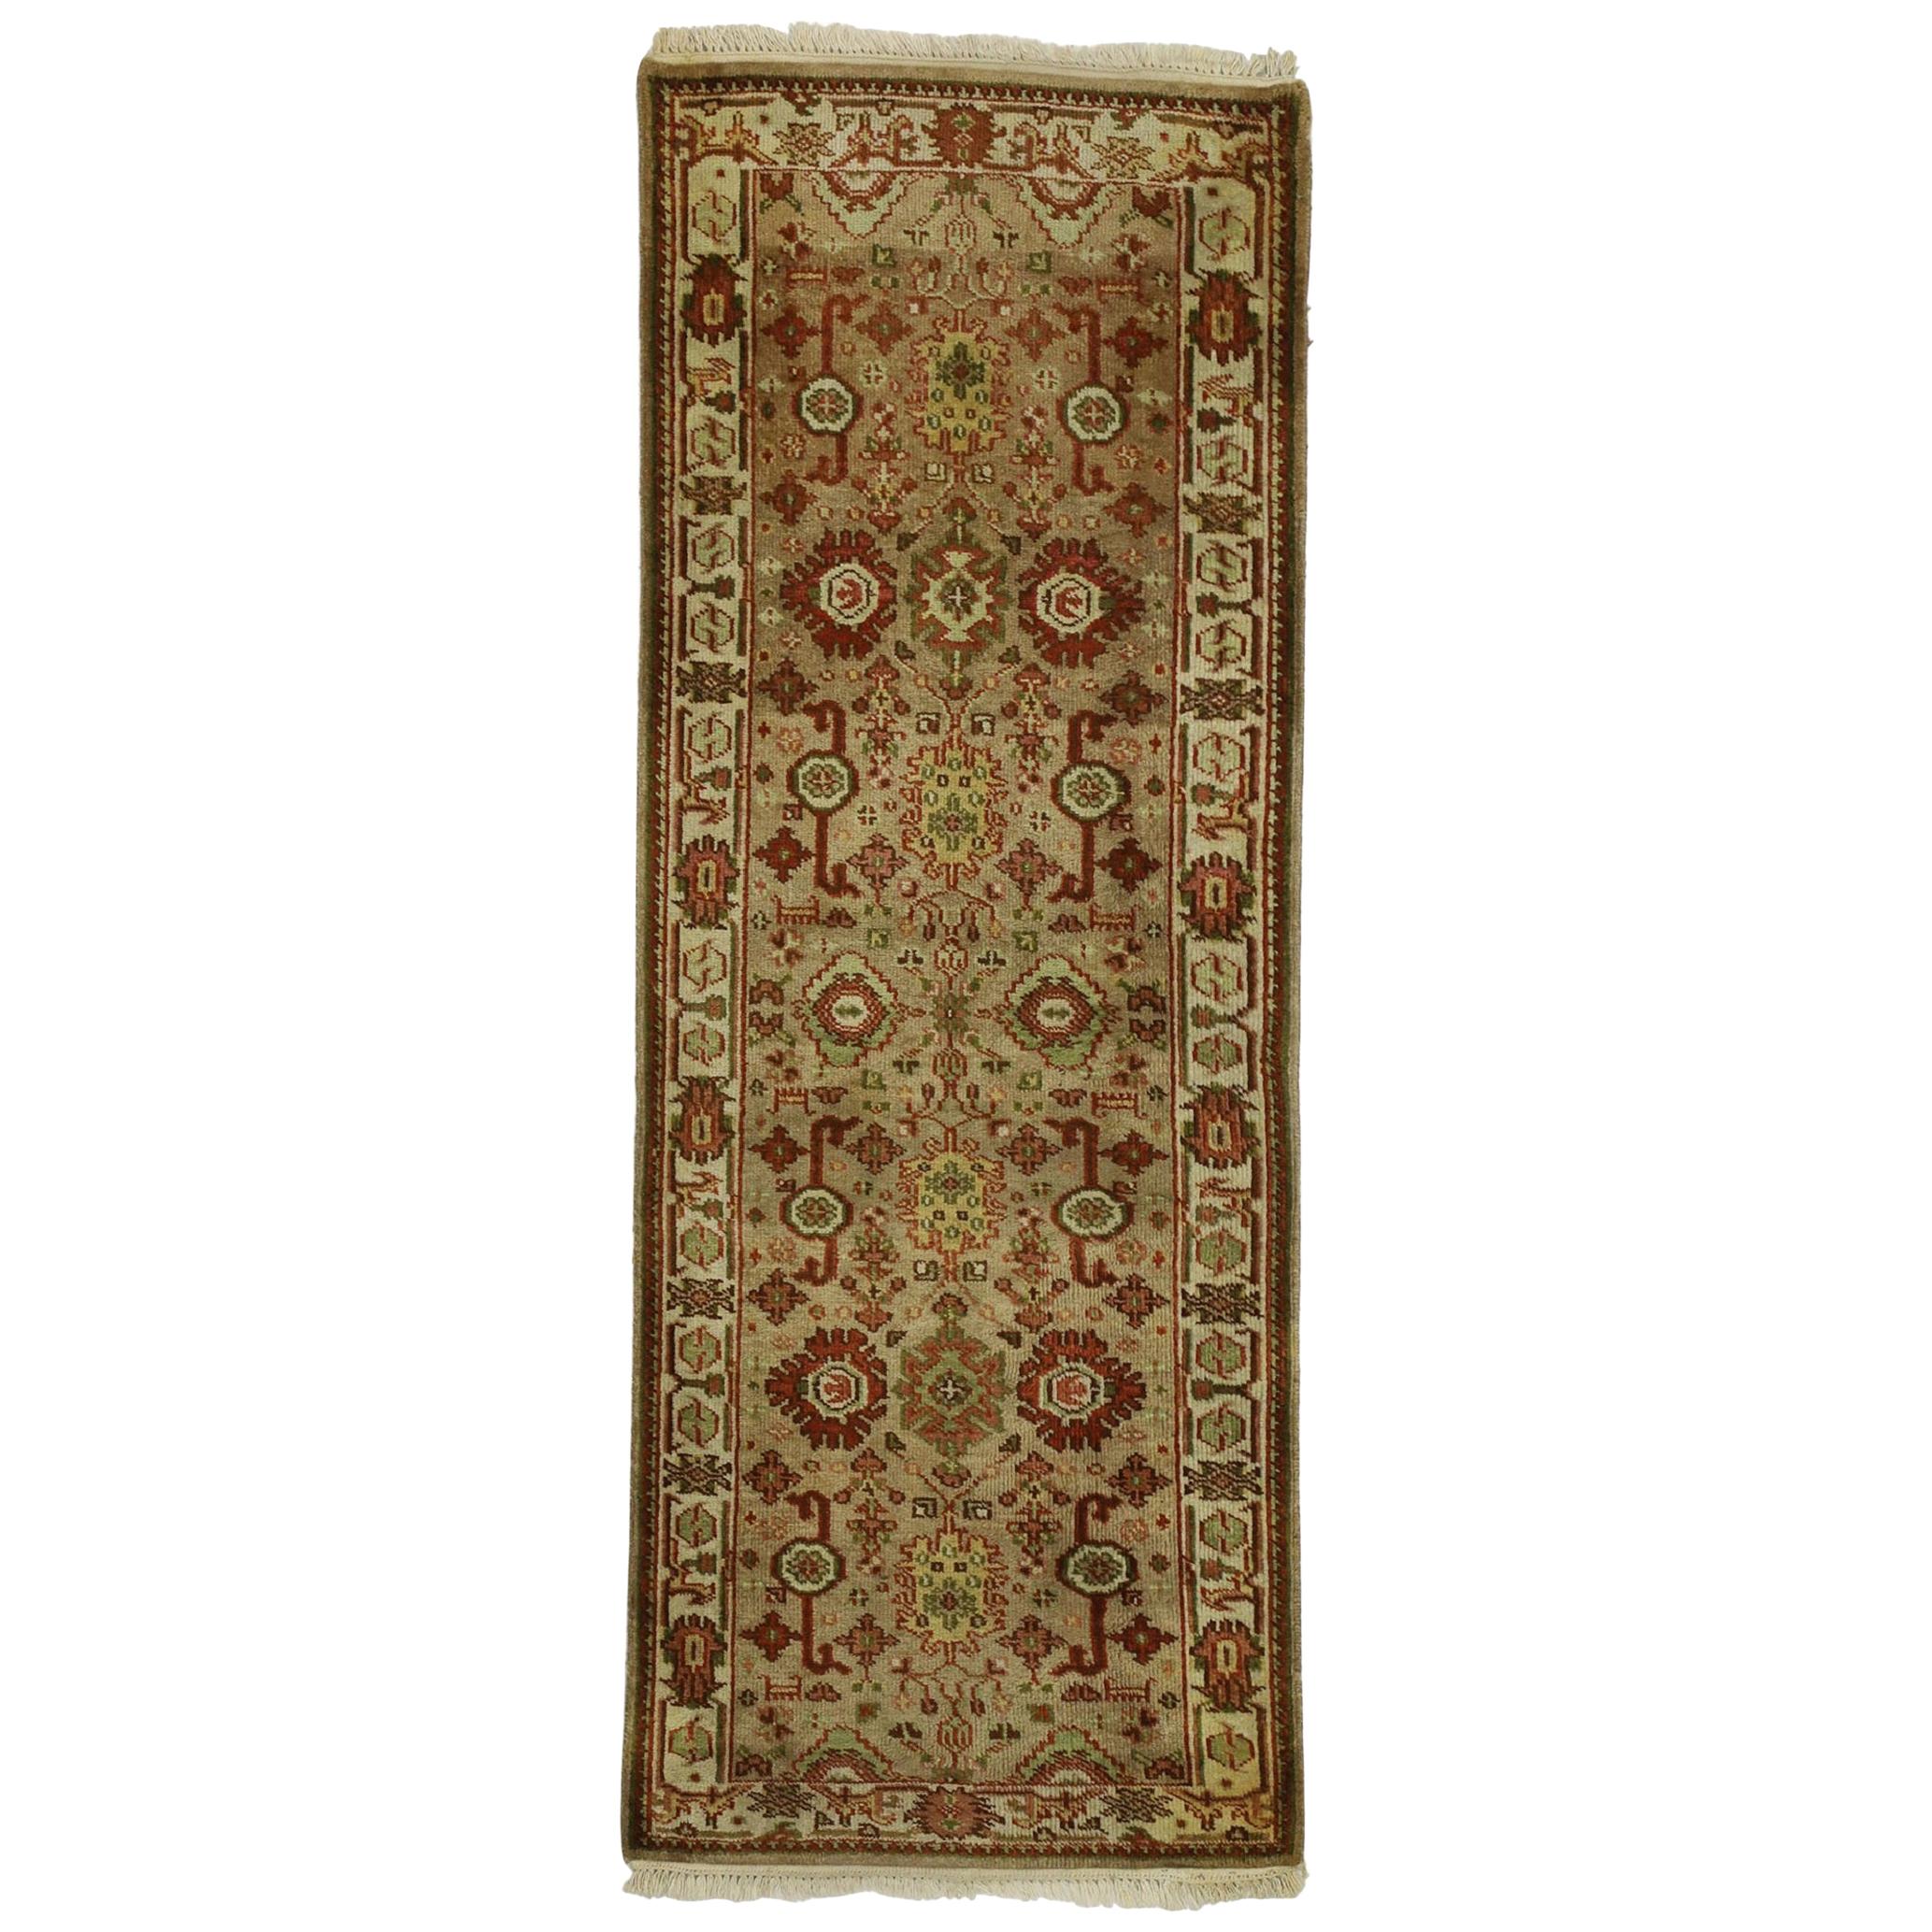 Vintage Indian Runner with Rustic Arts & Crafts Style, Short Hallway Runner